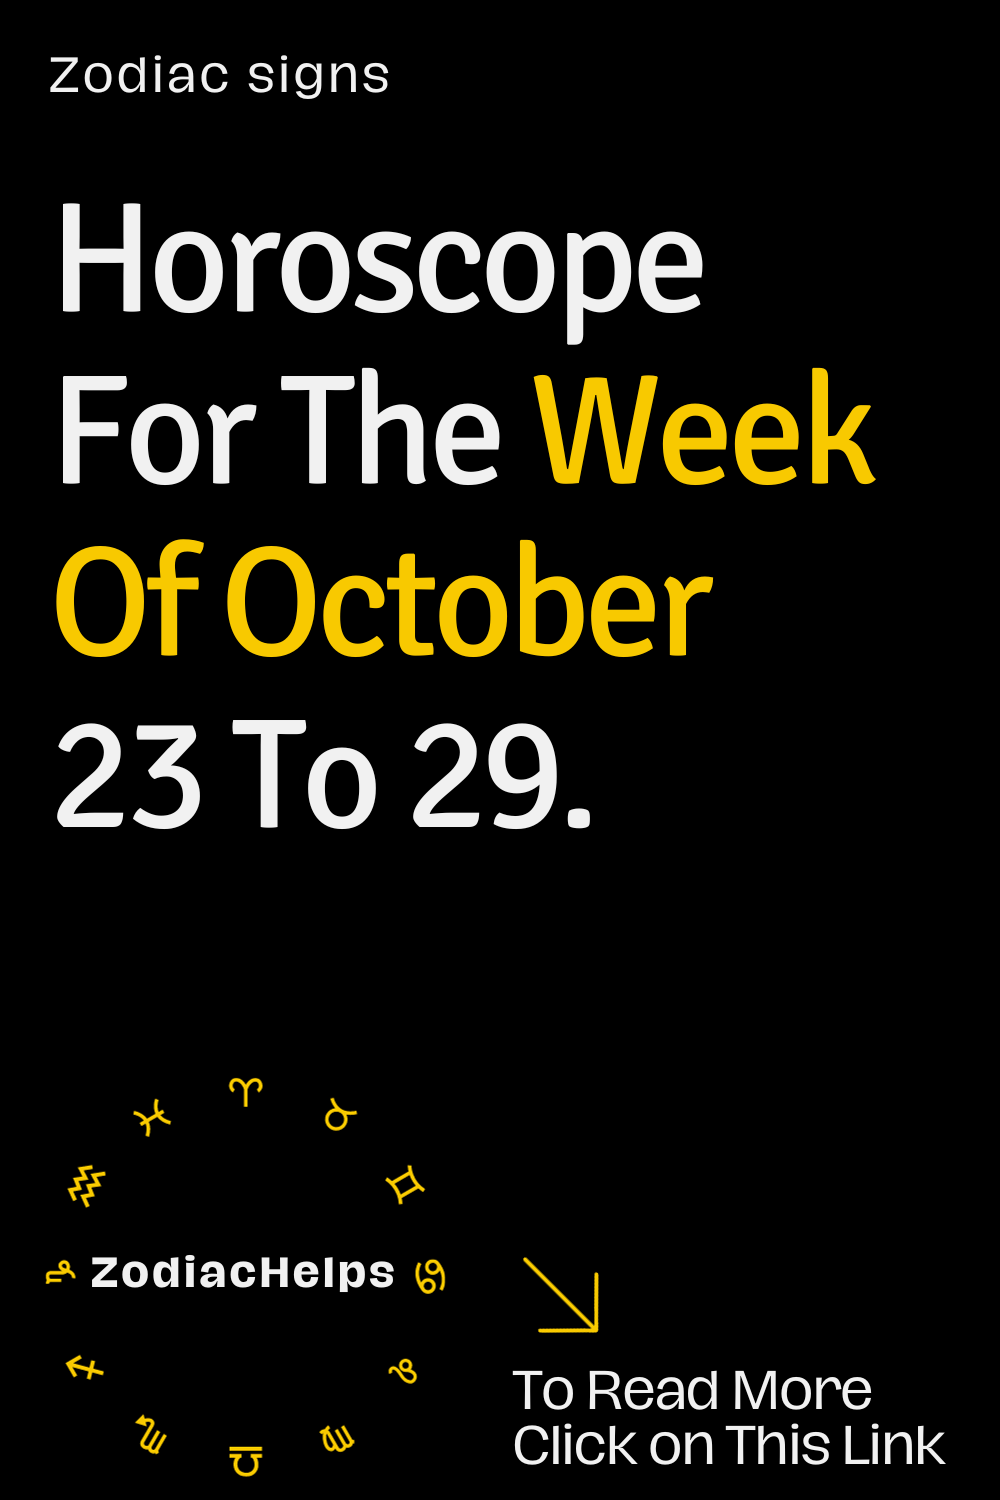 Horoscope For The Week Of October 23 To 29.